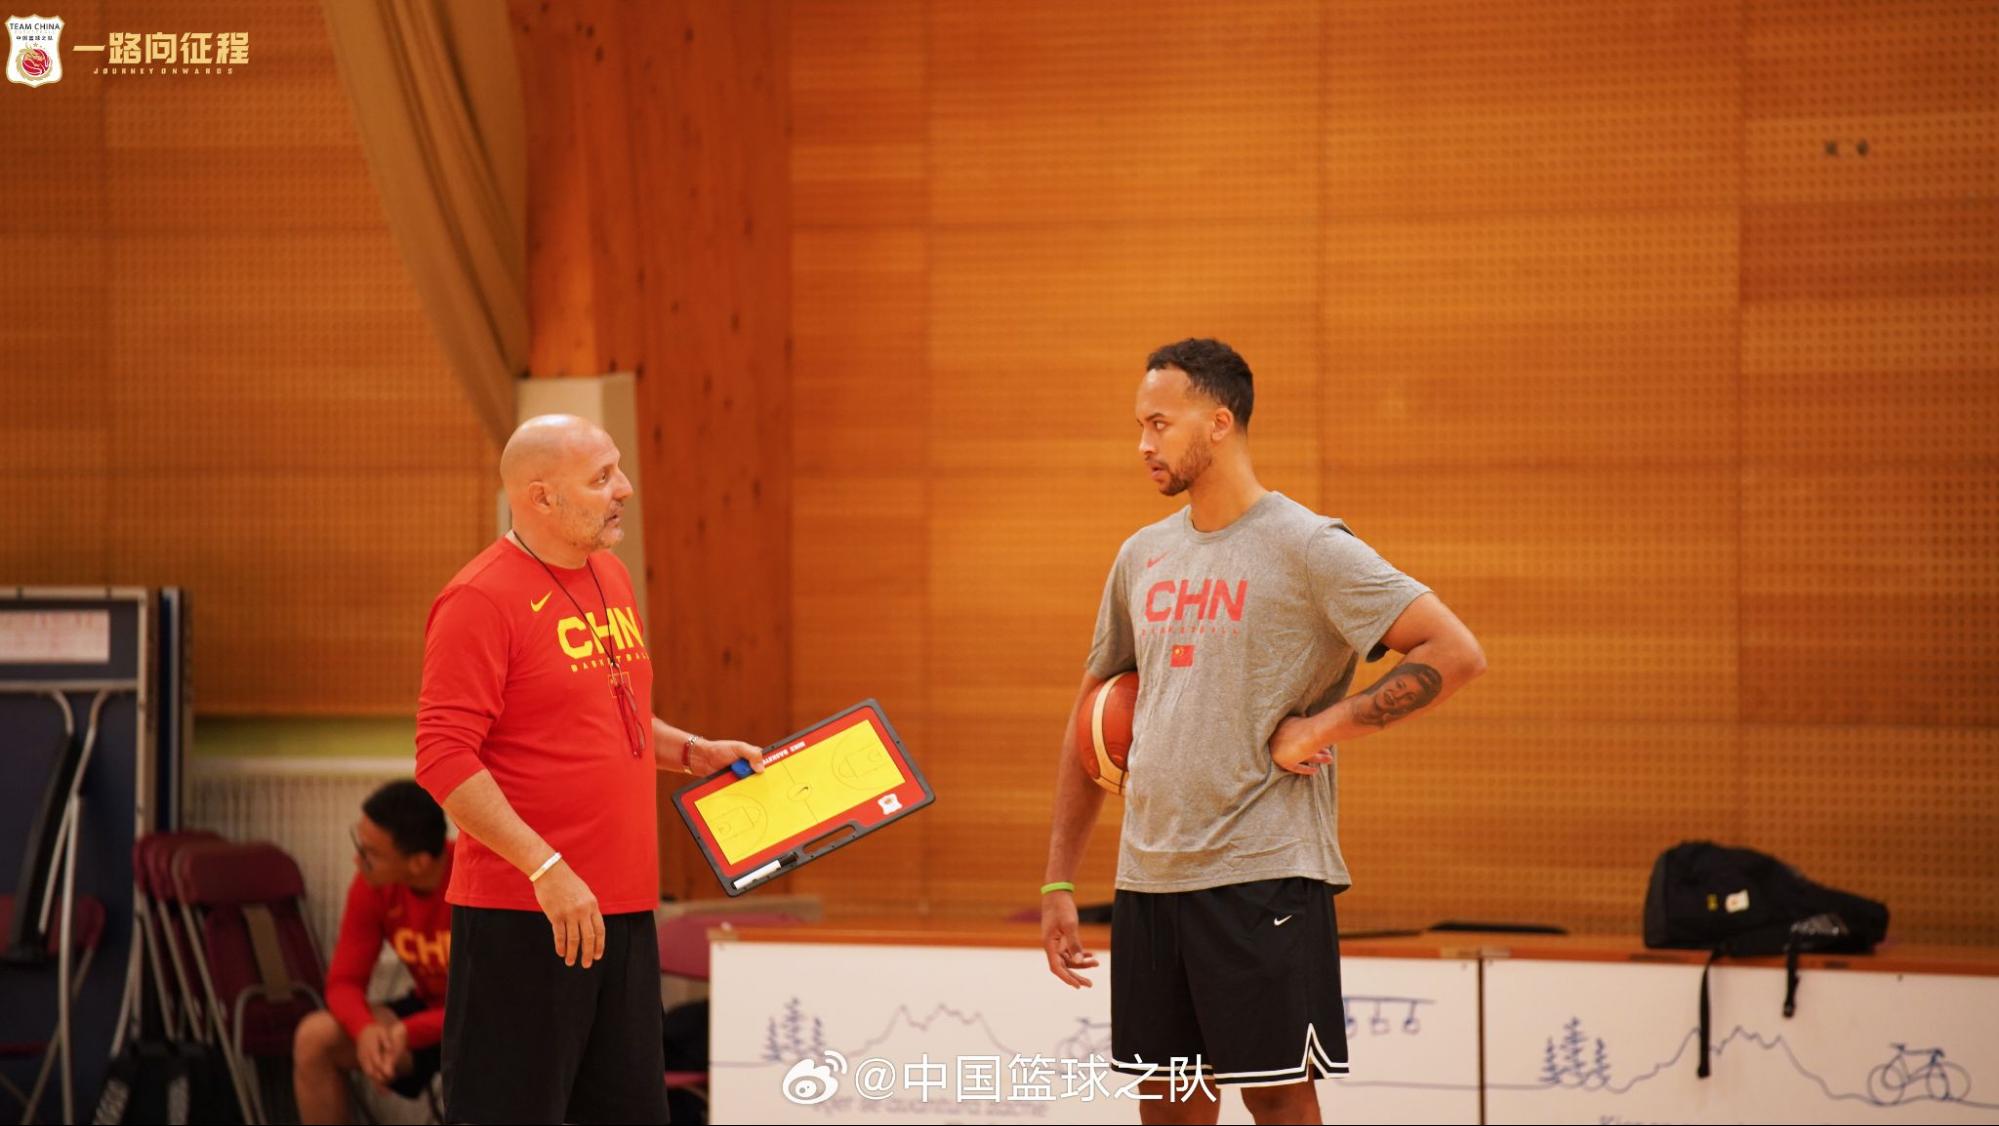 U.S.born Kyle Anderson China’s first naturalized basketball